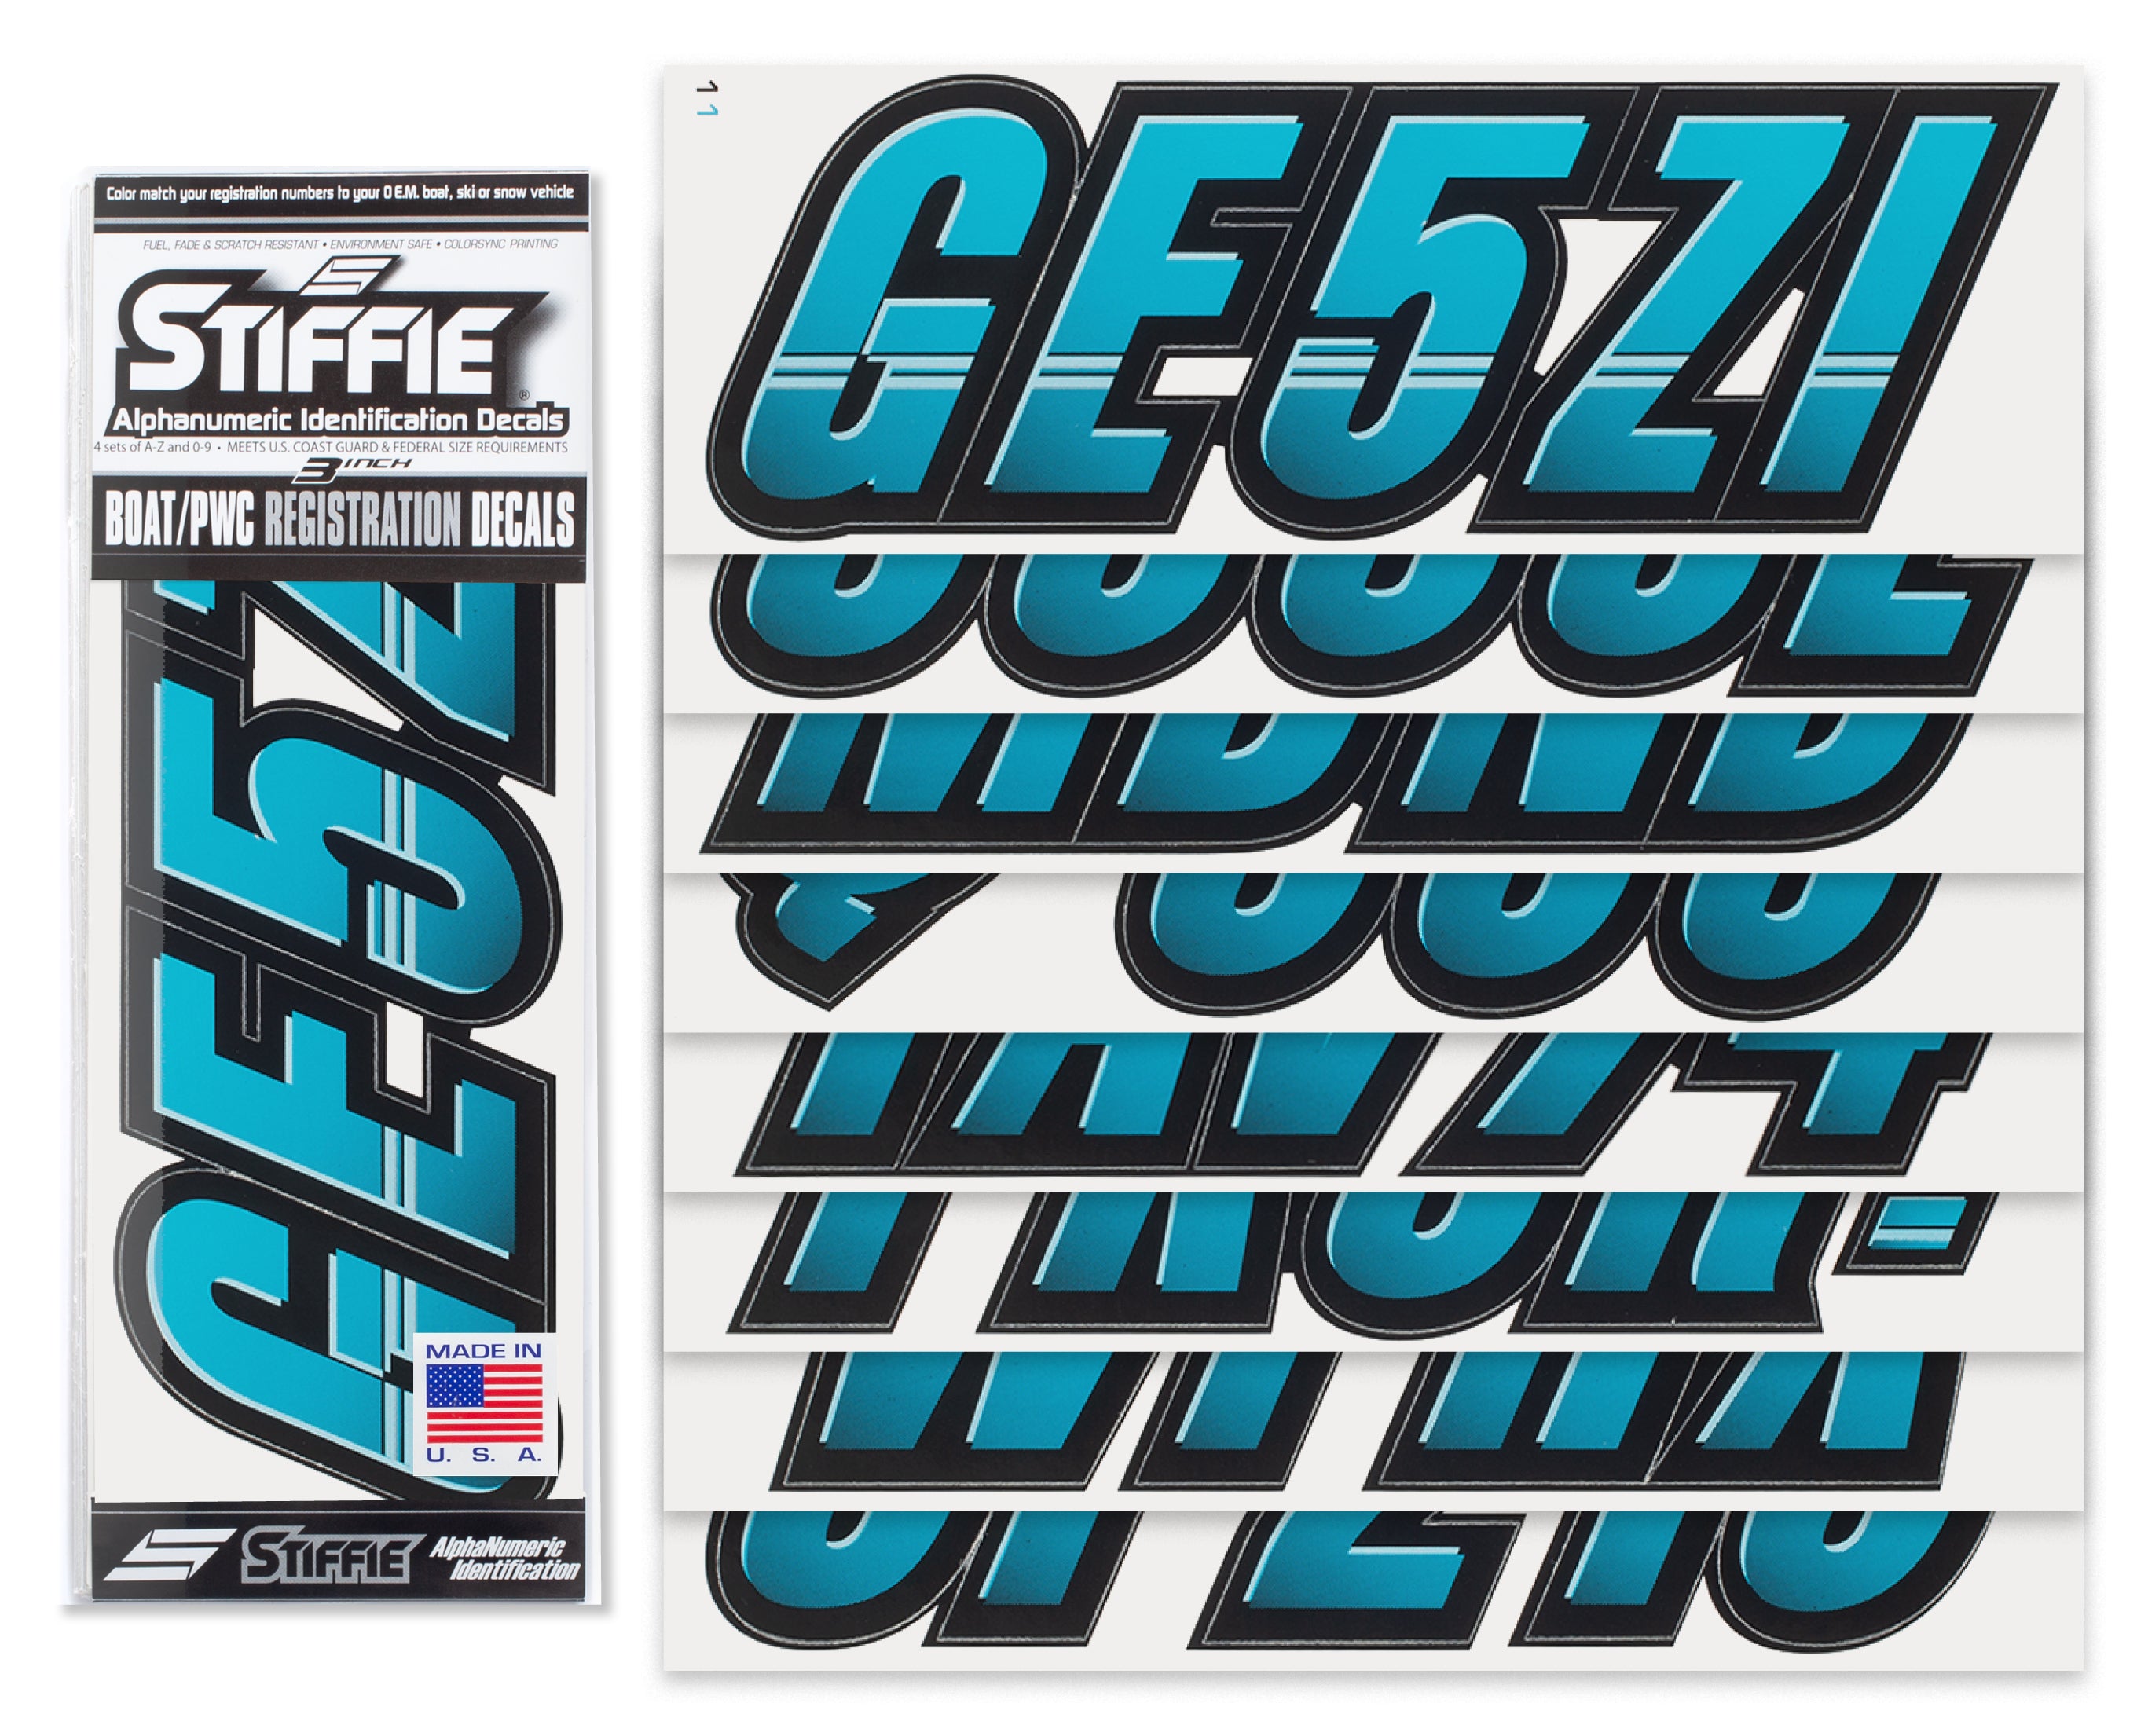 Stiffie Techtron Sky Blue/Black 3" Alpha-Numeric Registration Identification Numbers Stickers Decals for Boats & Personal Watercraft